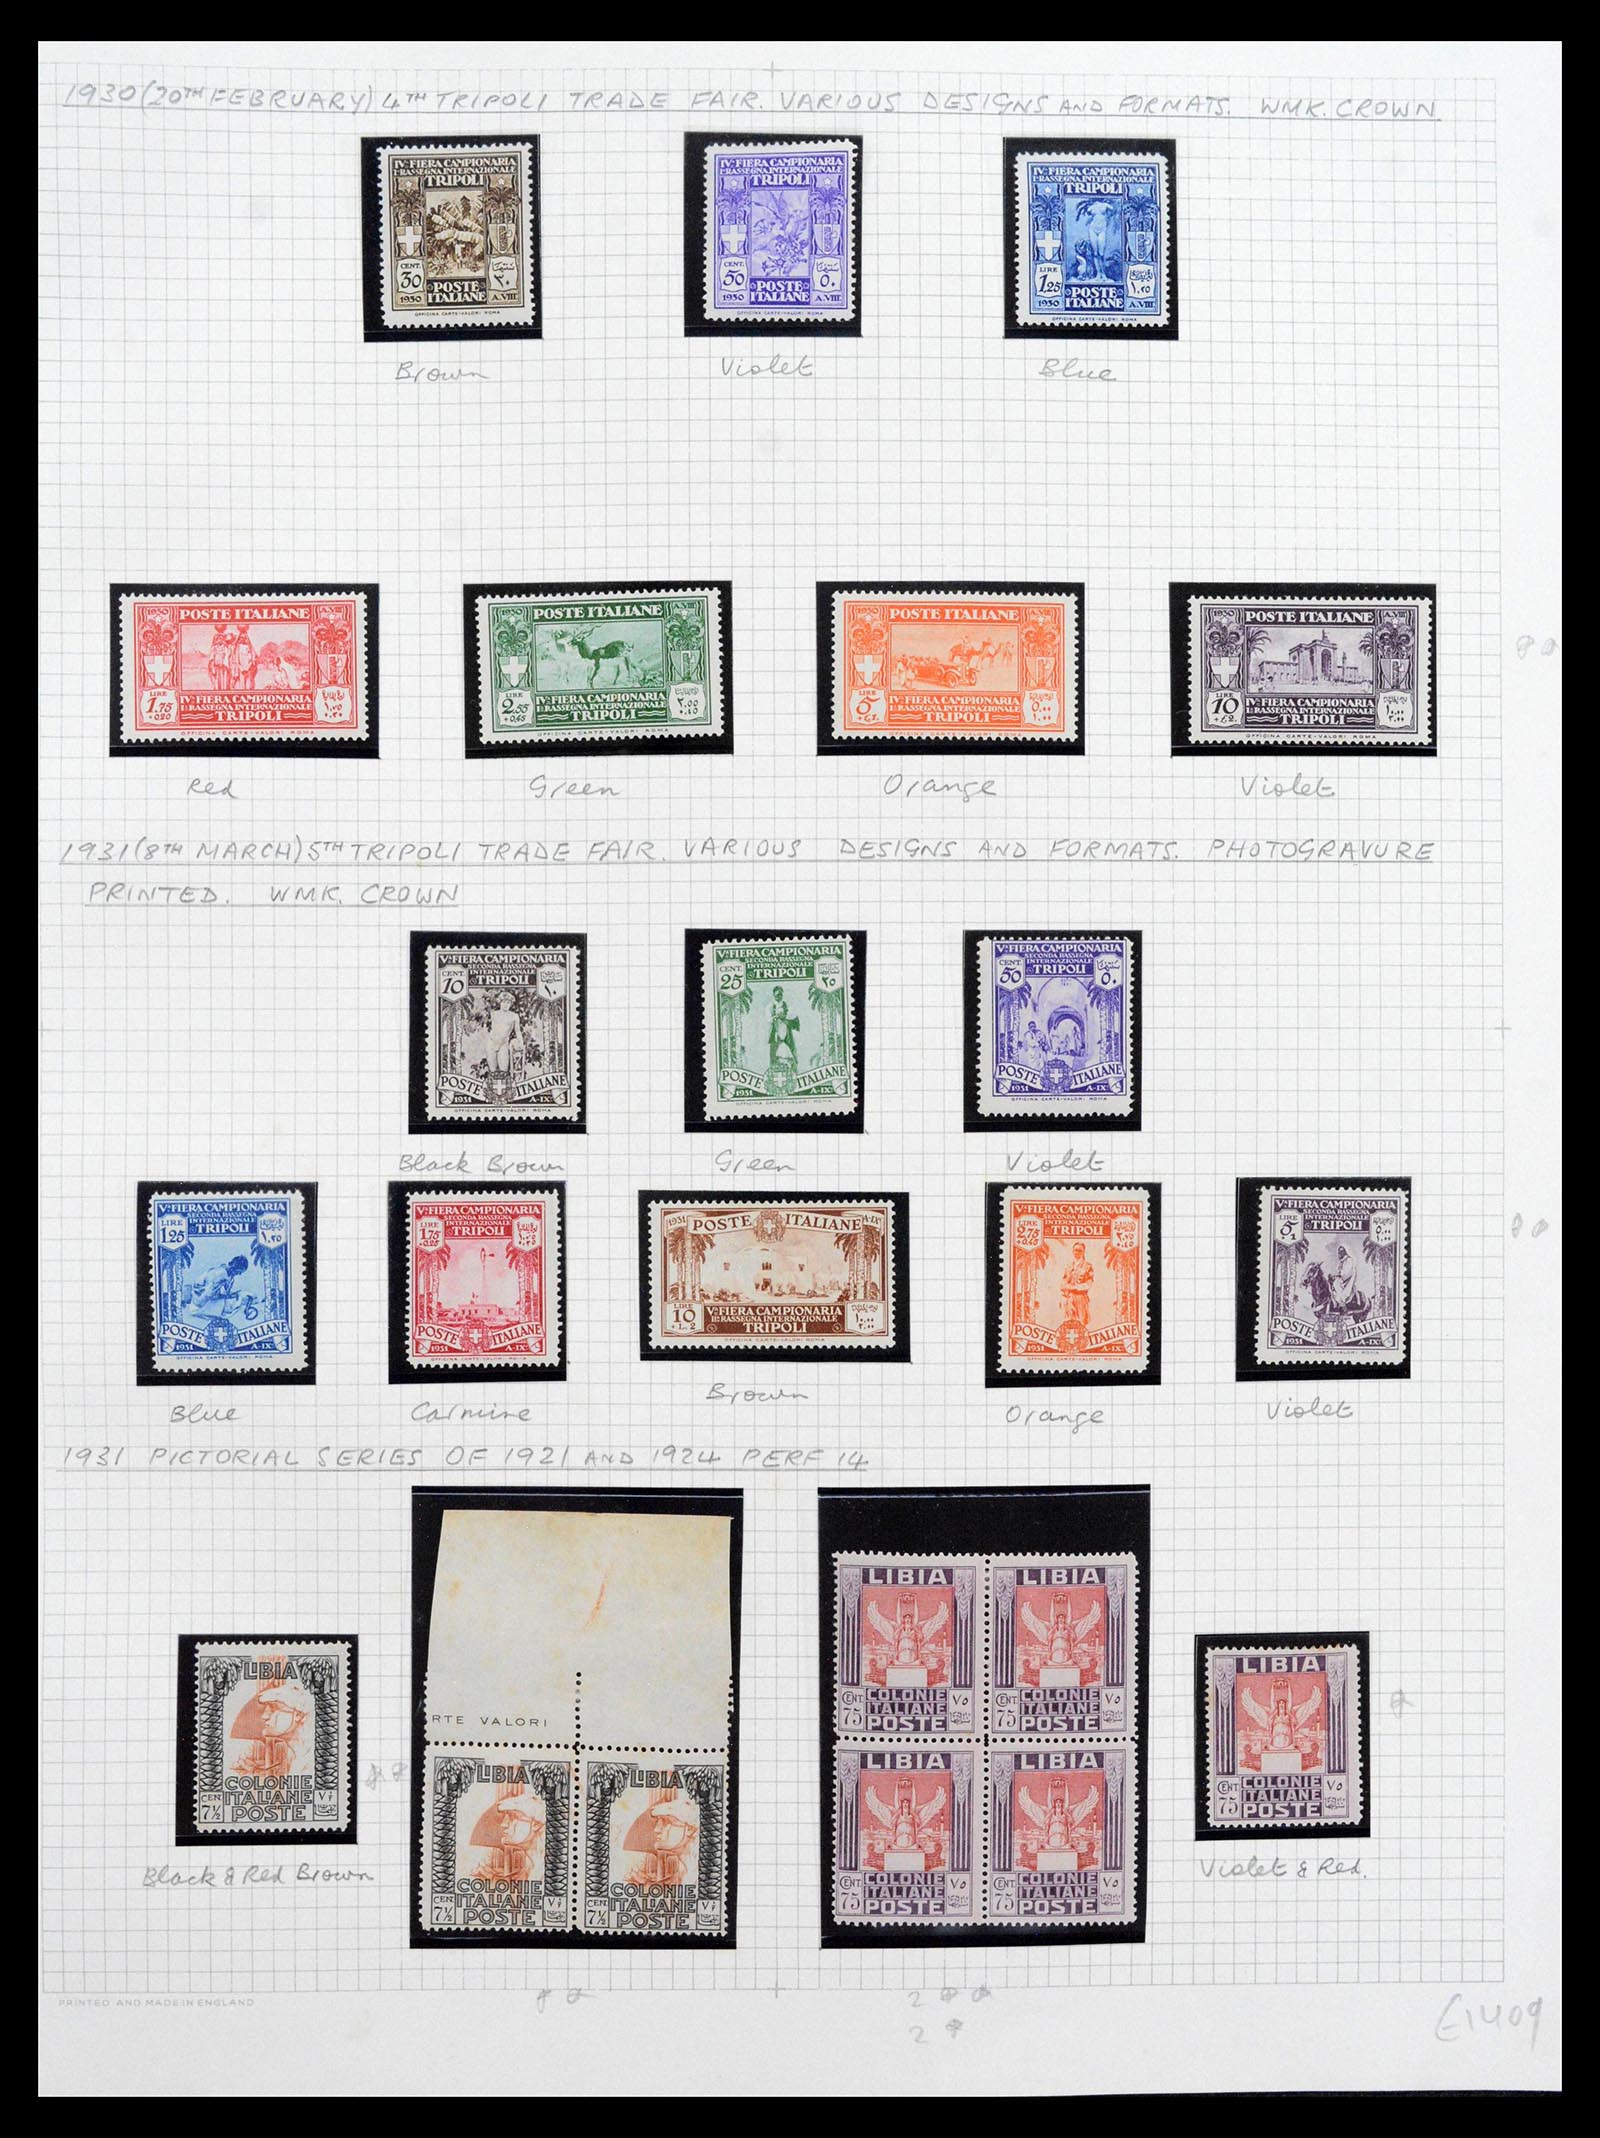 39068 0013 - Stamp collection 39068 Libya complete 1912-1969.